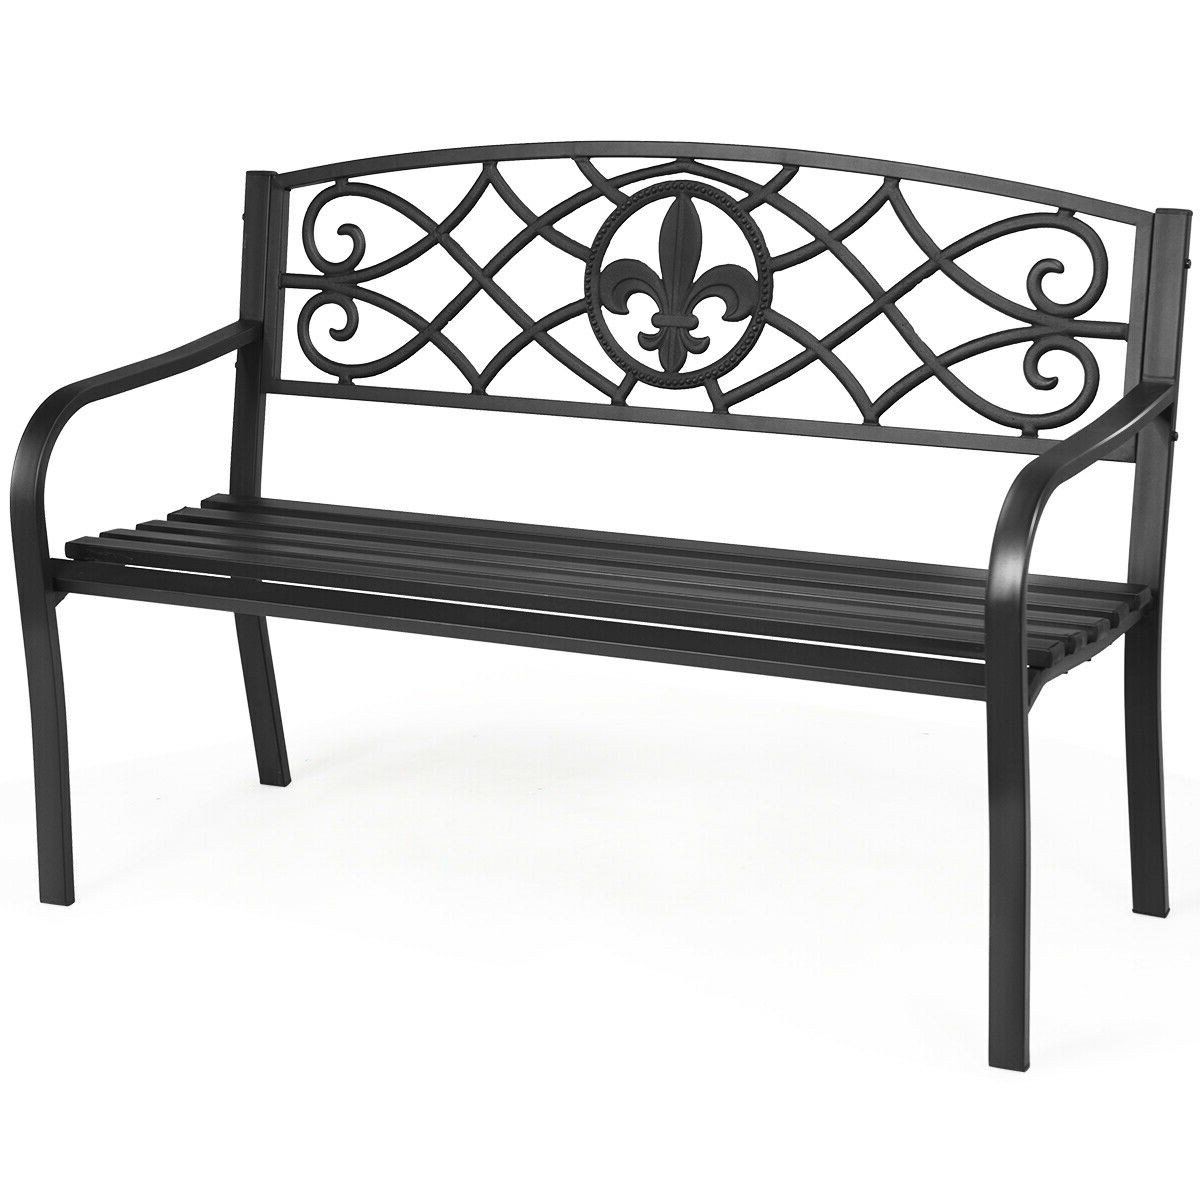 Most Popular Ishan Steel Park Benches Pertaining To Patio Park Yard Outdoor Furniture Steel Bench (View 8 of 30)